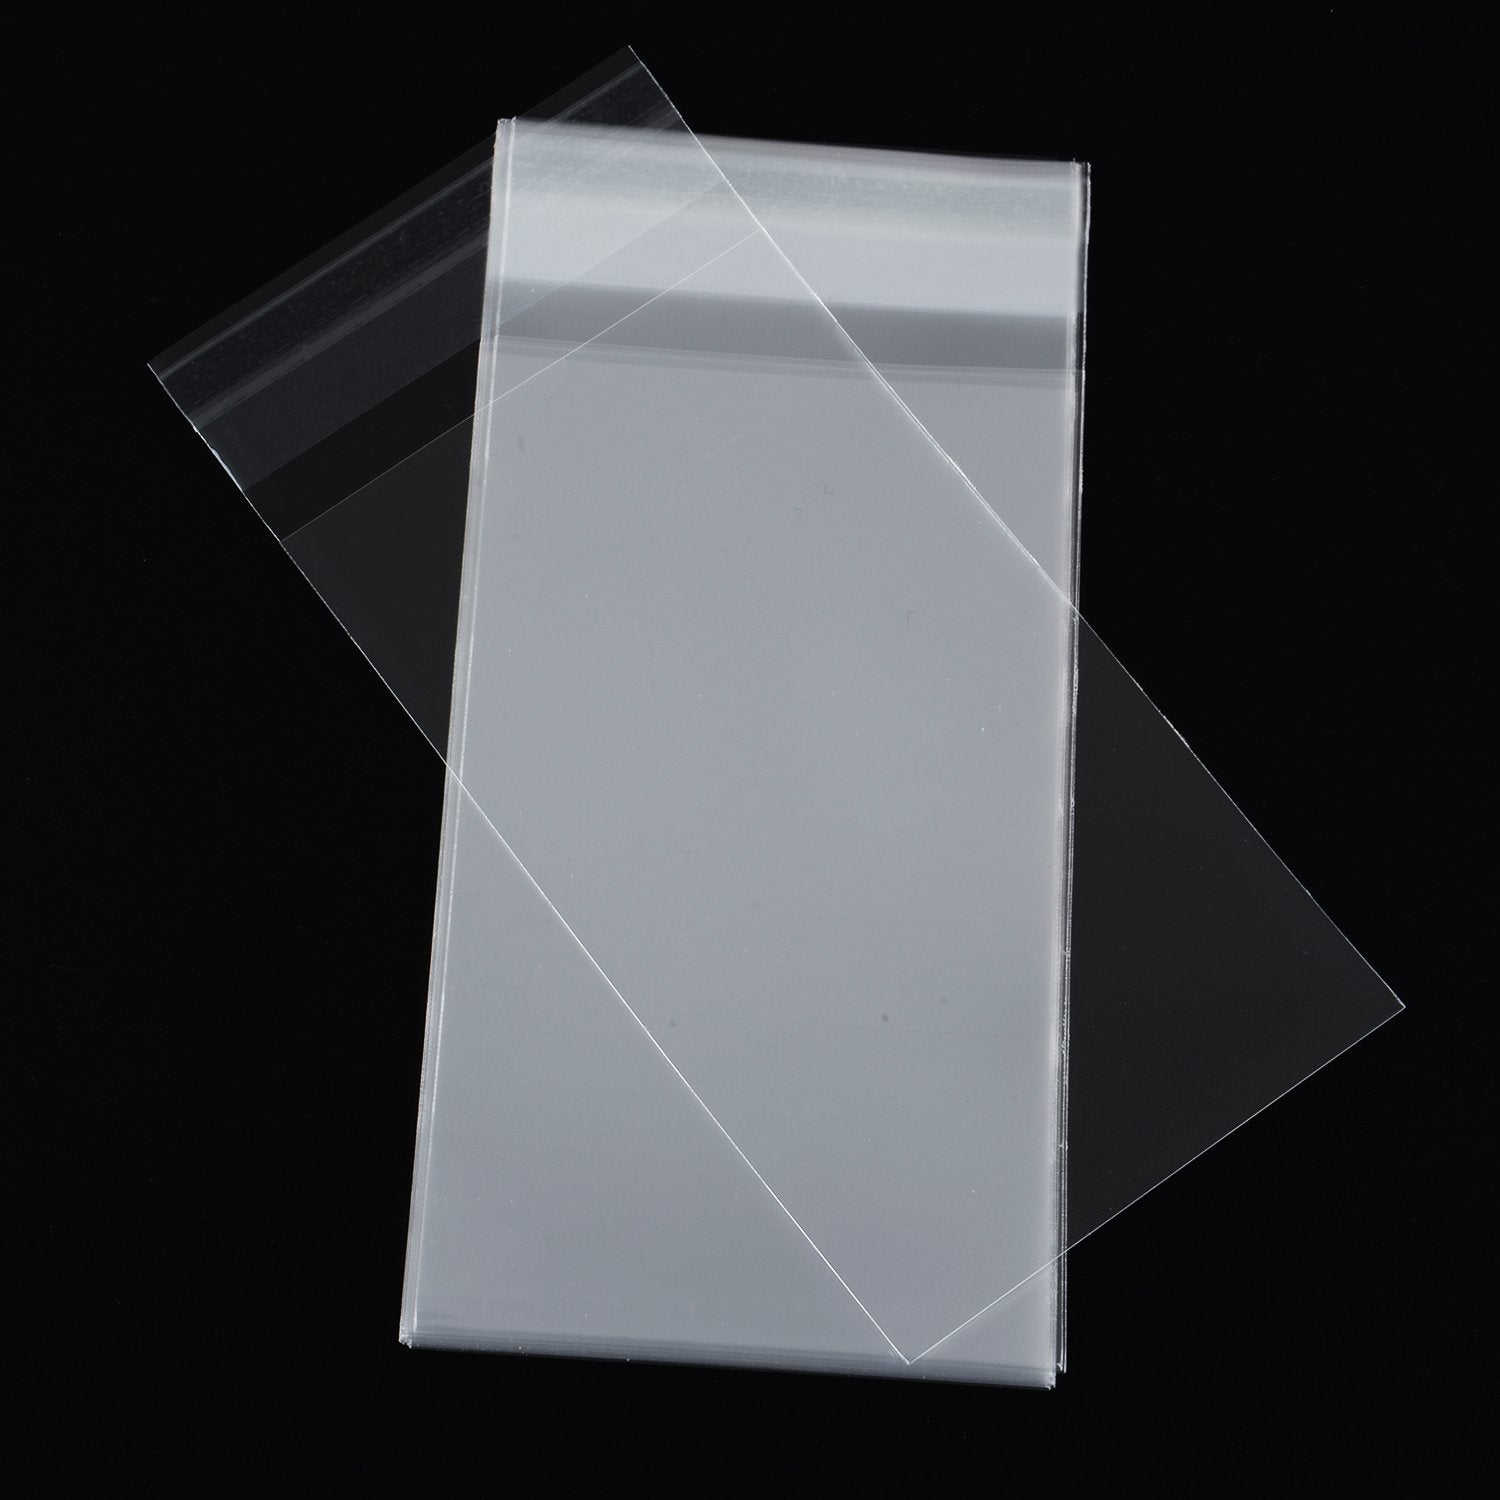 300 Pieces (3 x 5 Inches) Clear Cellophane Bags Self-adhesive Sealing Treat Bags OPP Plastic Bag for Candy, Soap, Cookie, Valentine Chocolates